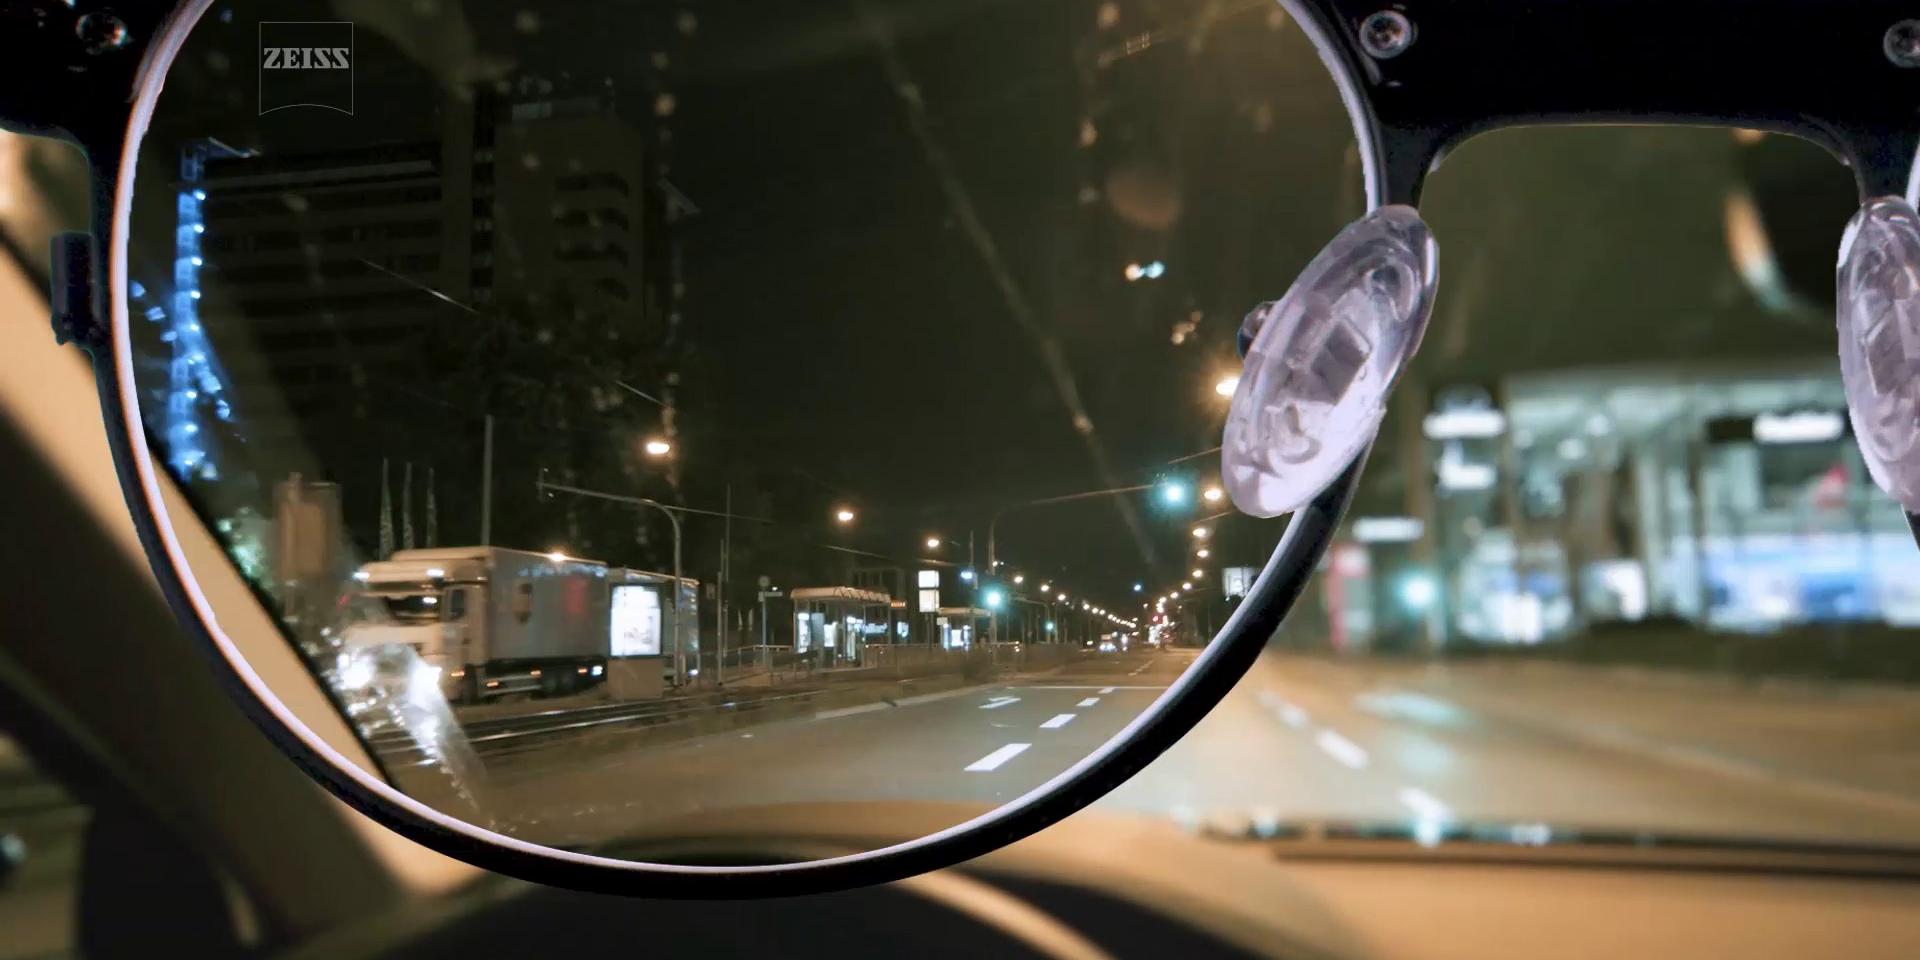 Developing spectacle lenses for driving